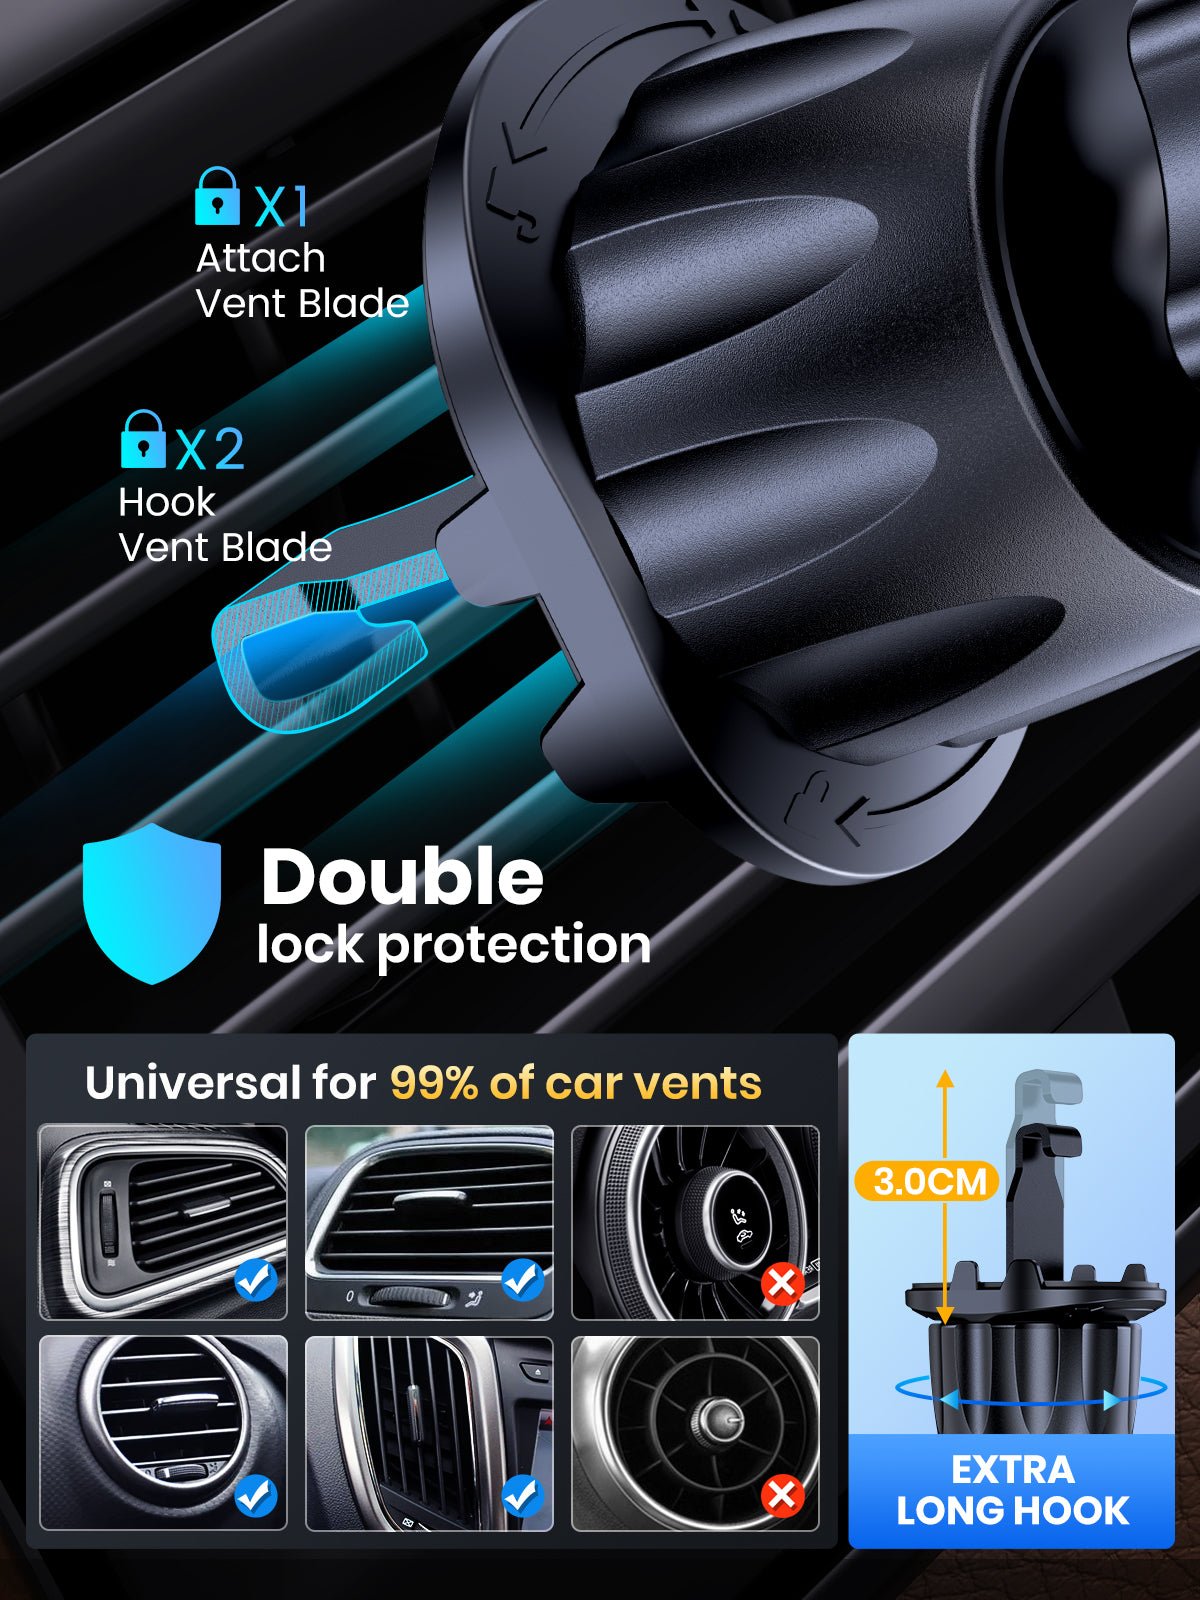  TOPK 2-Pack Phone Holders for Your Car [Wider Clamp